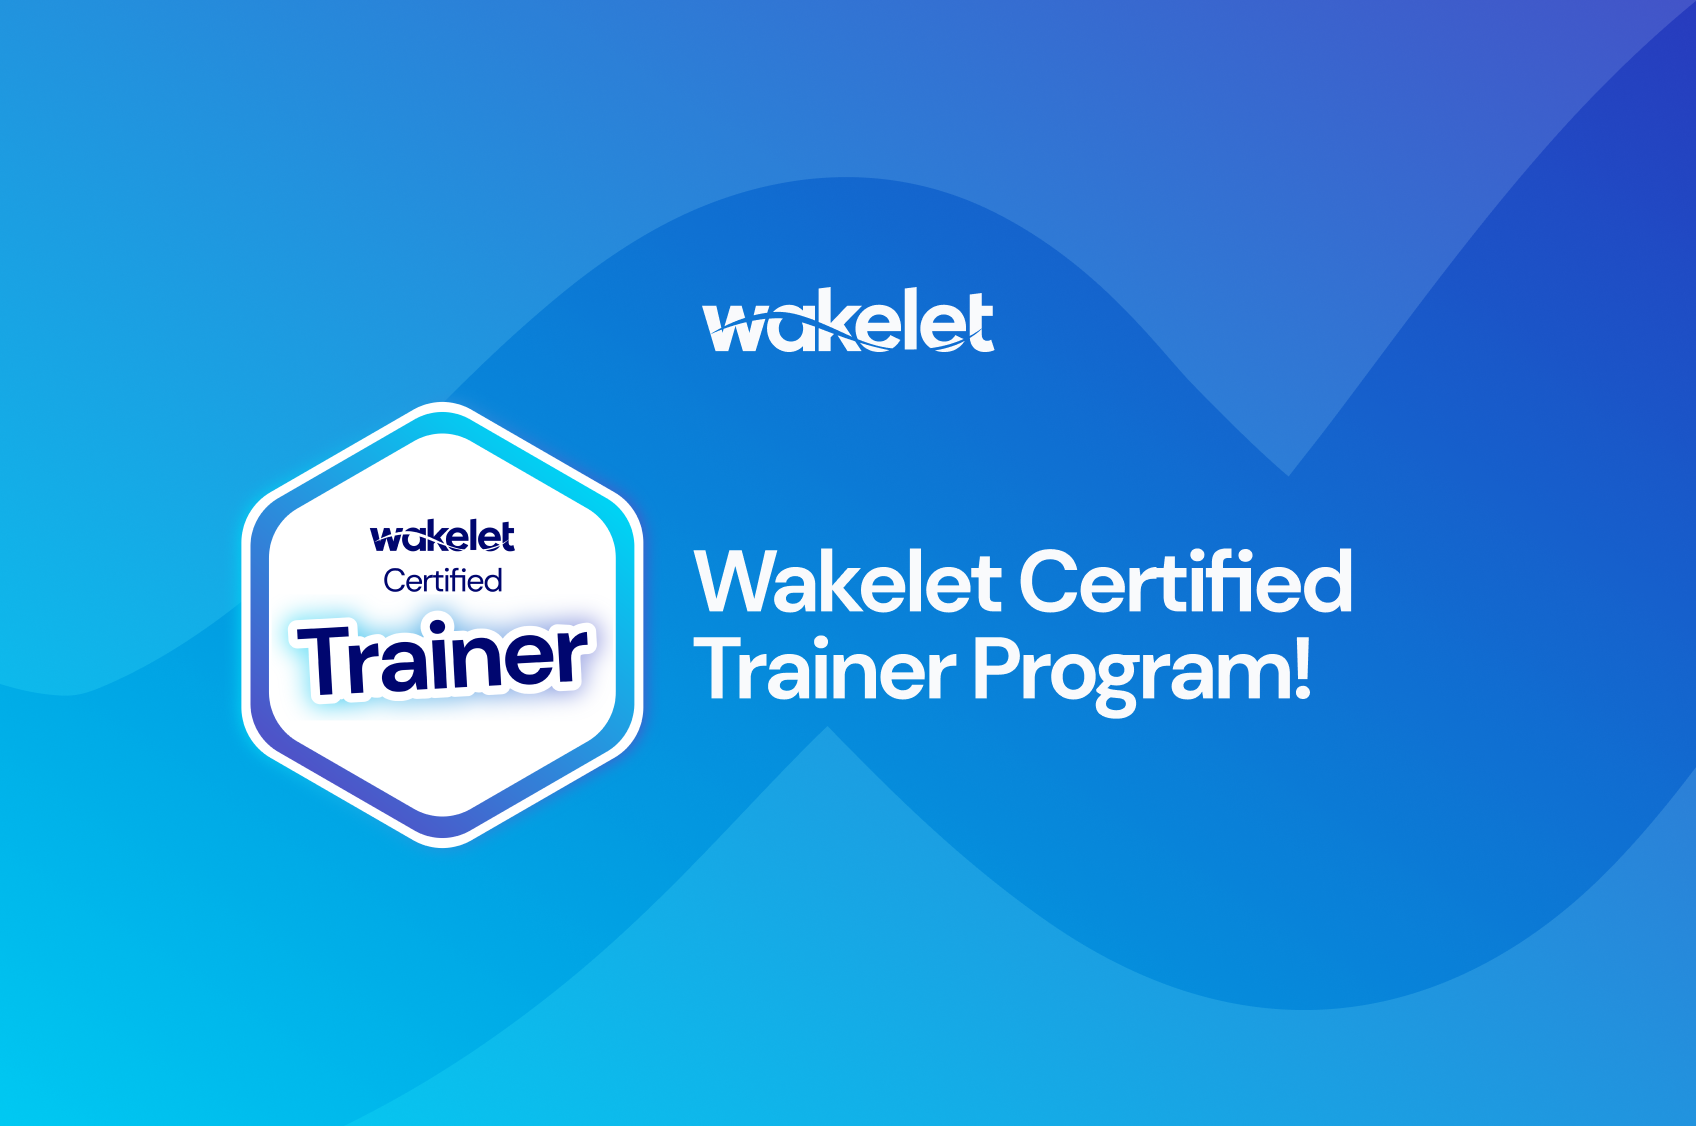 Wakelet Certified Trainer Program with an image of the badge